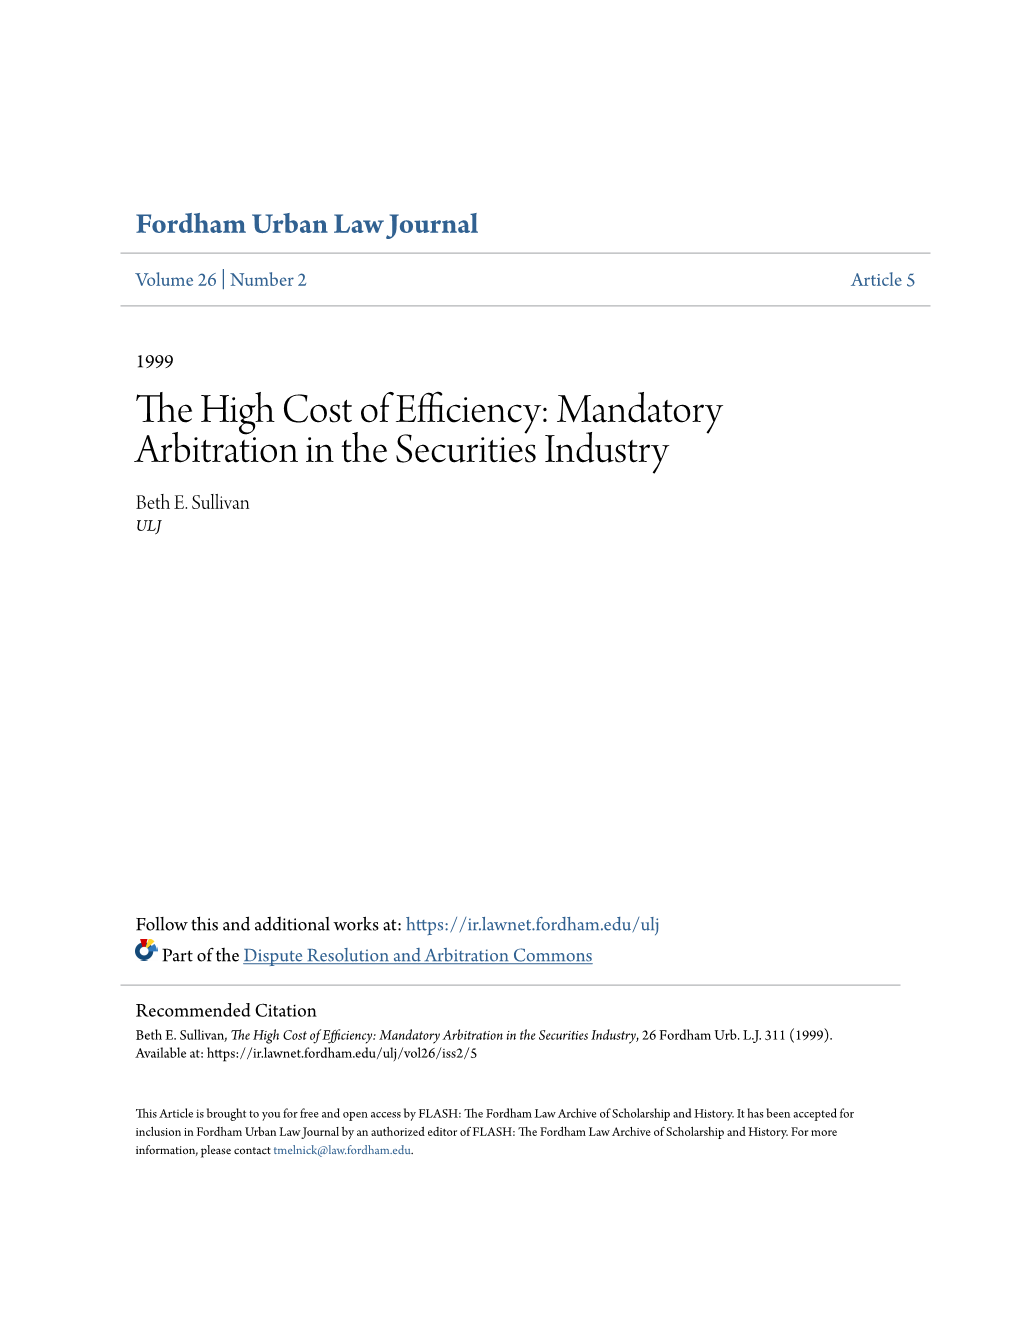 Mandatory Arbitration in the Securities Industry Beth E